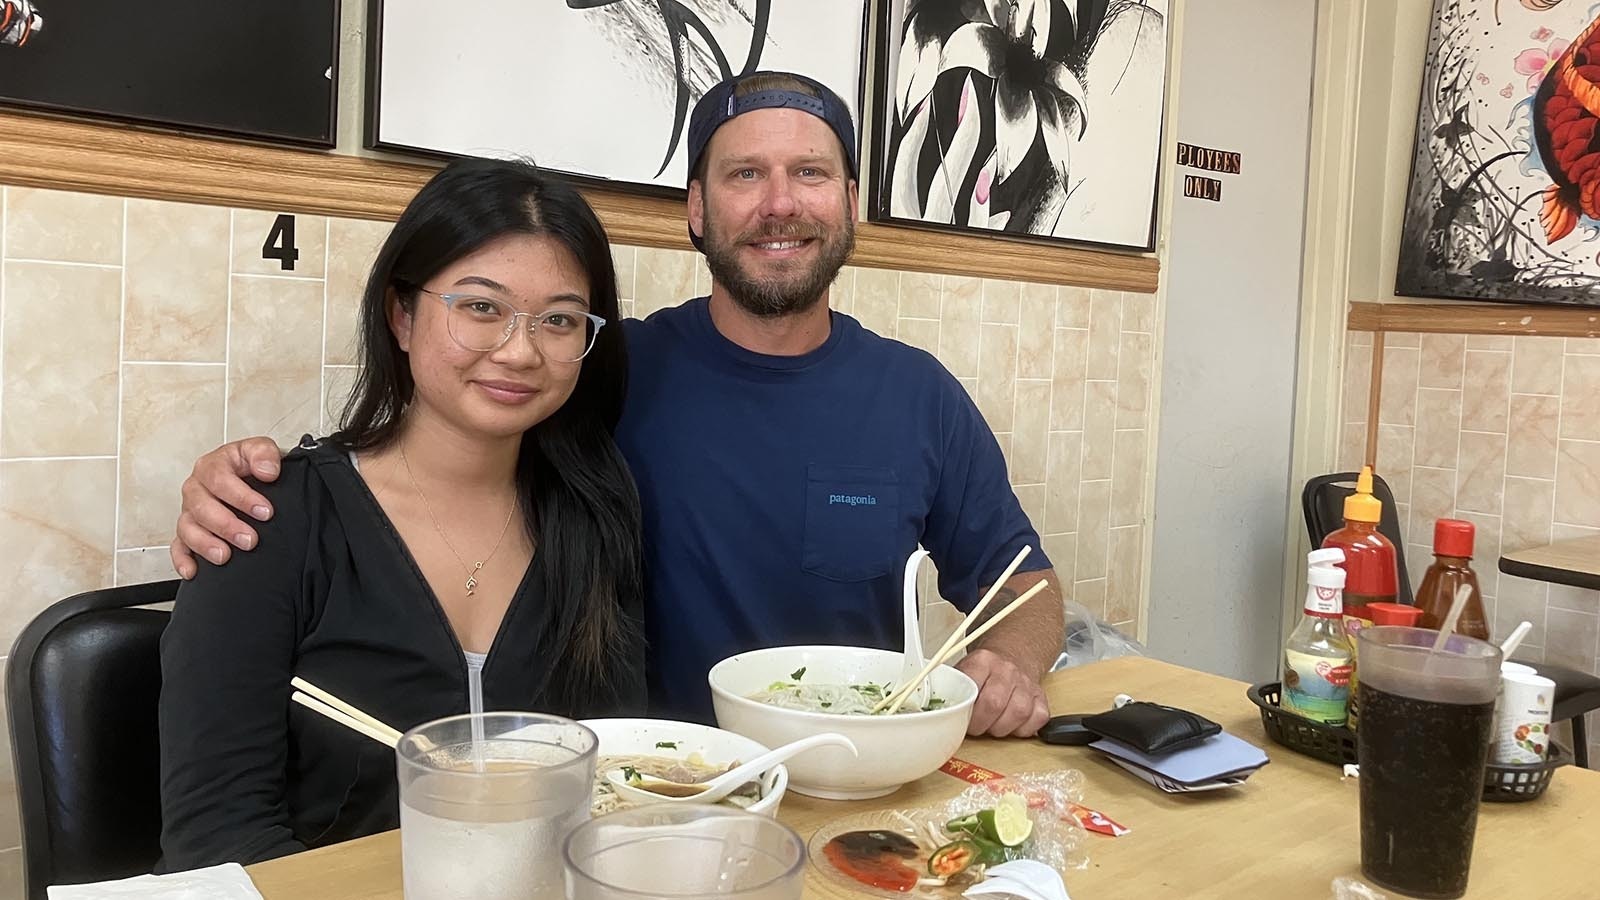 Anna Tran and Jim Thompson were checking out Pho Saigon for the first time. Tran said the pho soup was “legit” and the broth better than what she can make. She grew up in a Vietnamese family.